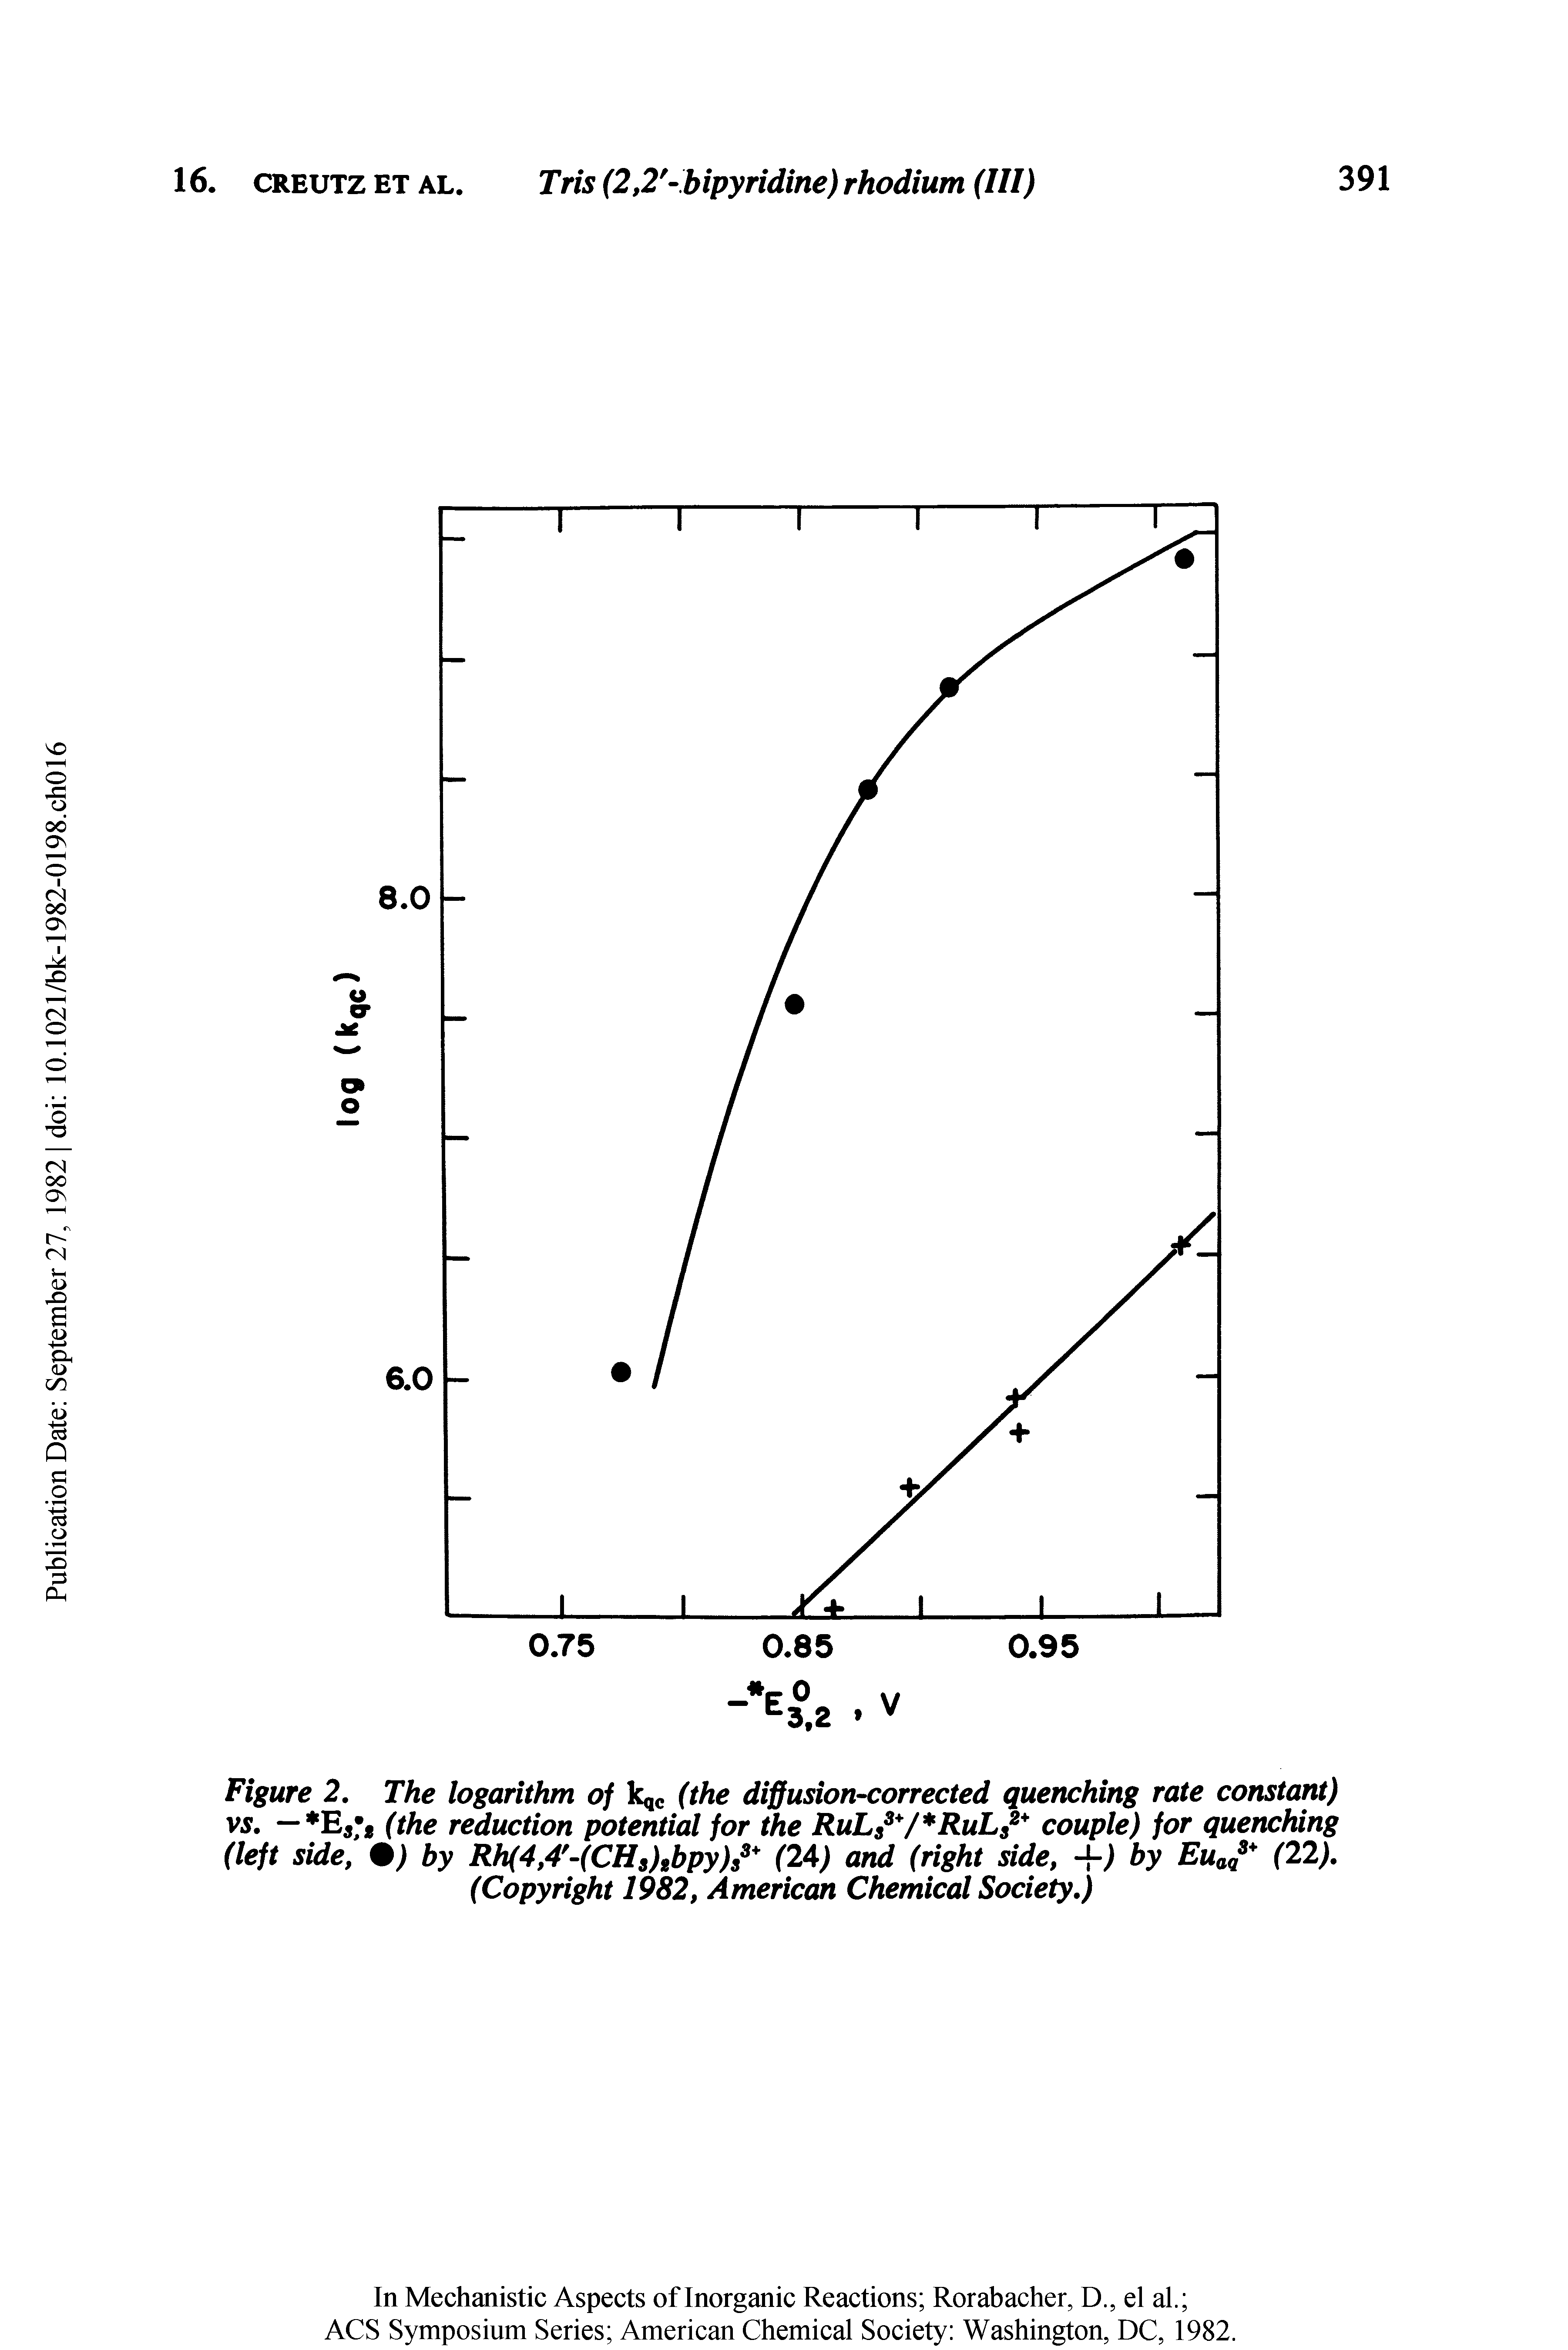 Figure 2. The logarithm of kqc (the diffusion-corrected quenching rate constant) vs. — (the reduction potential for the RuLs3 / RuLs2 couple) for quenching (left side, by Rh(4f4 -(CHs)ibpy)s3+ (24) and (right side, + by Euaq3 (22). (Copyright 1982, American Chemical Society.)...